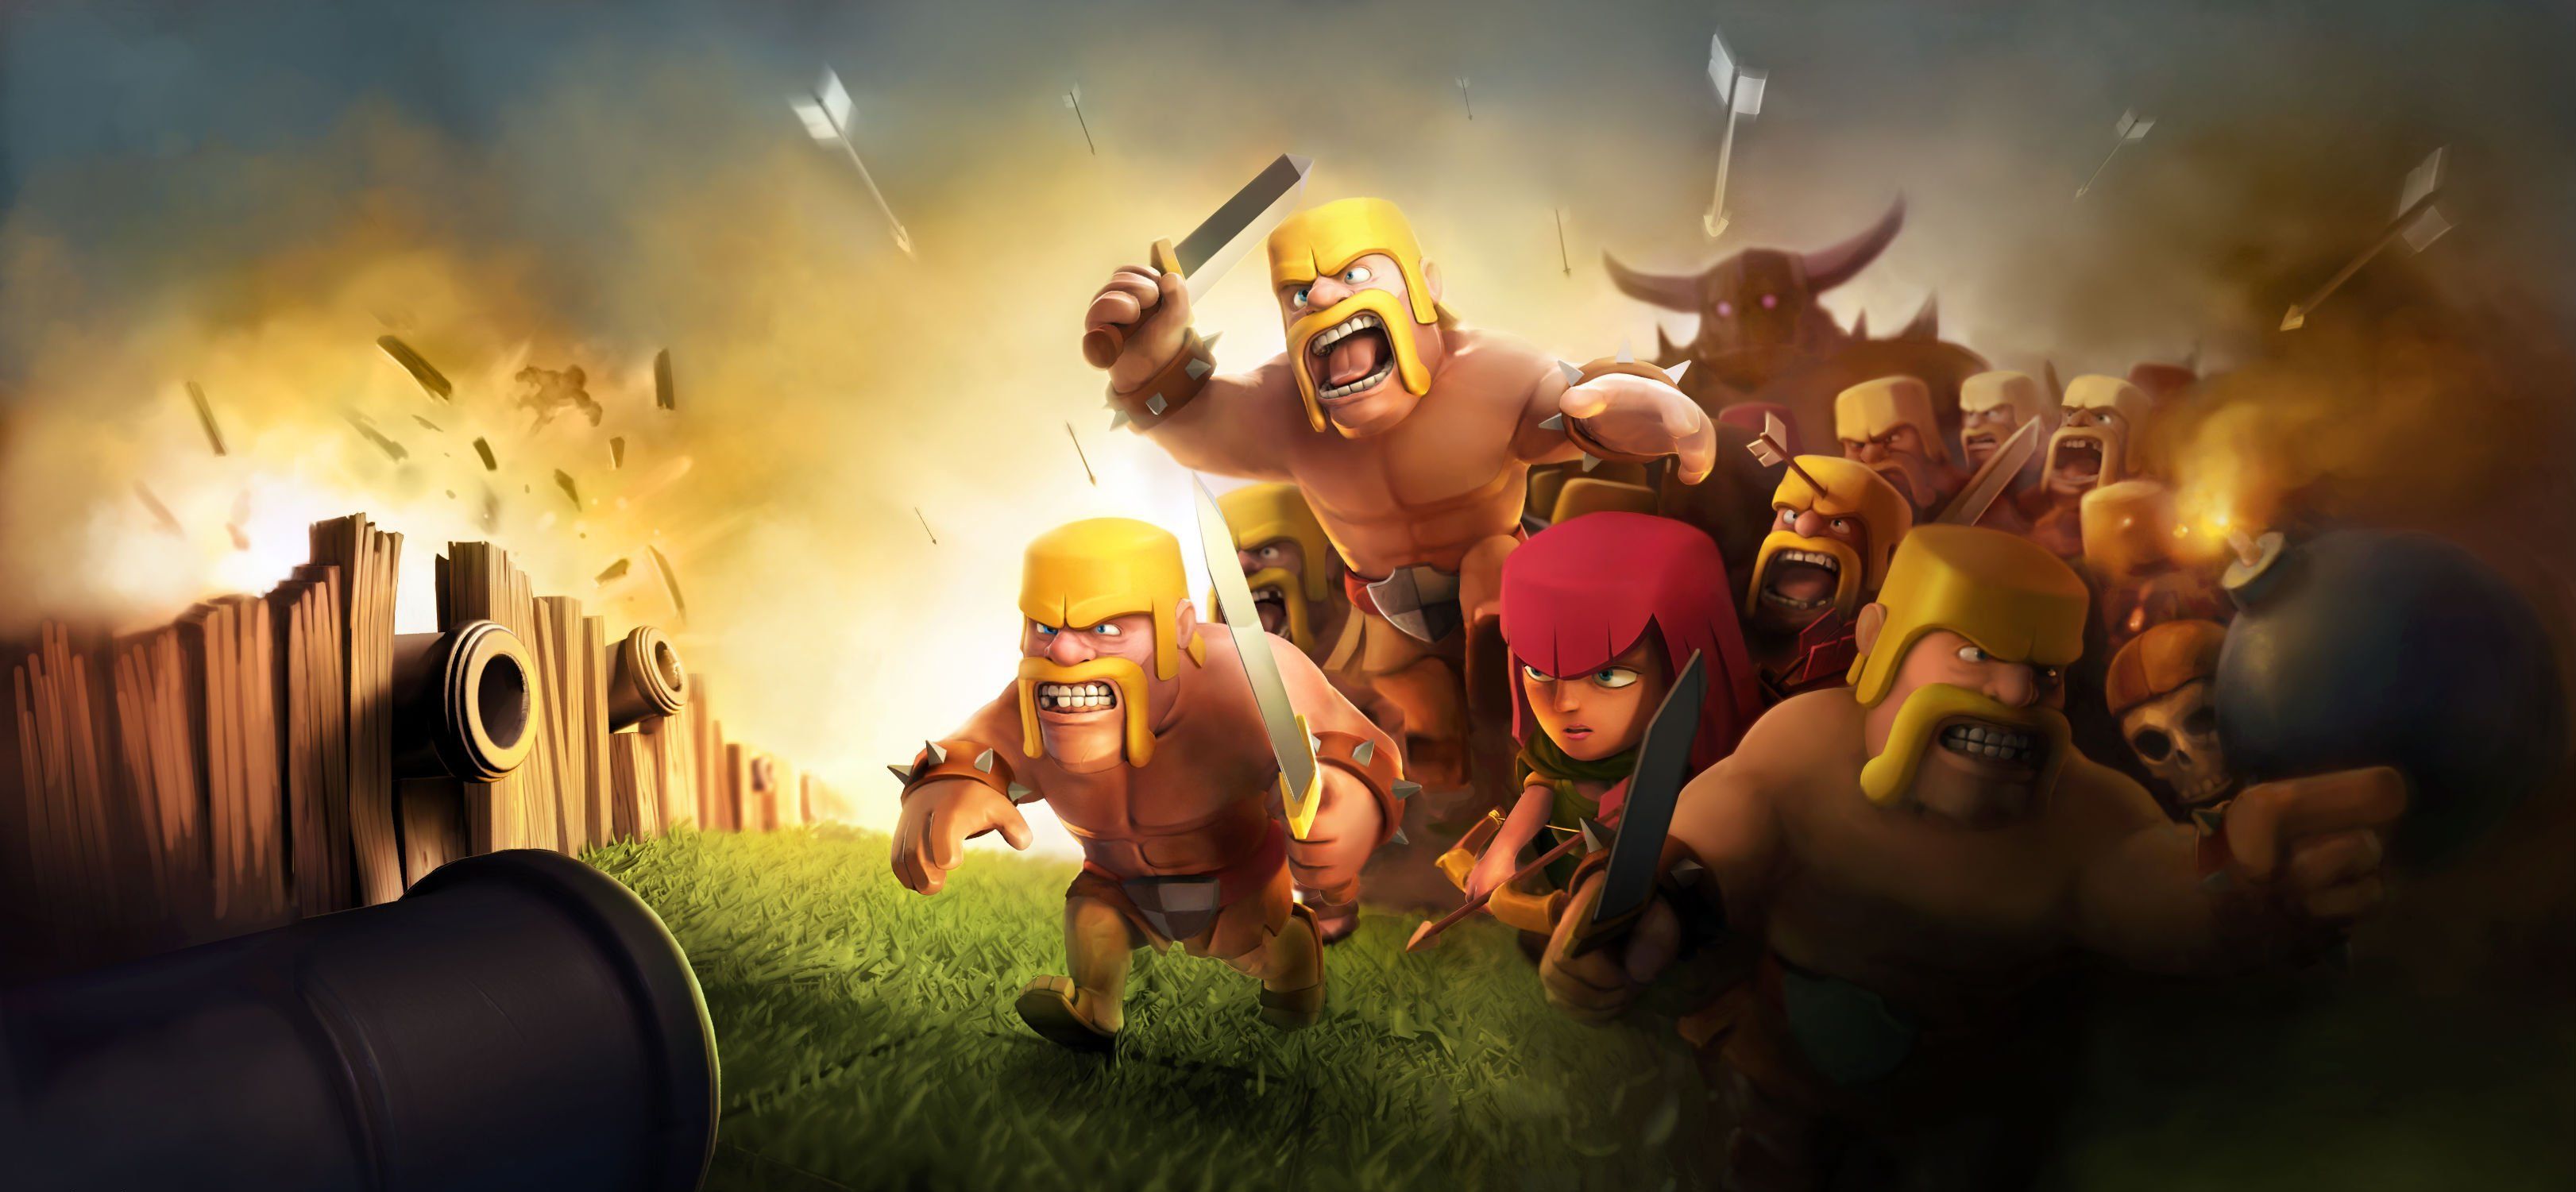 Clash Of Clans Game Hd Images  Wallpapers Coc Game 5 ClashOfClans  Wallpaper